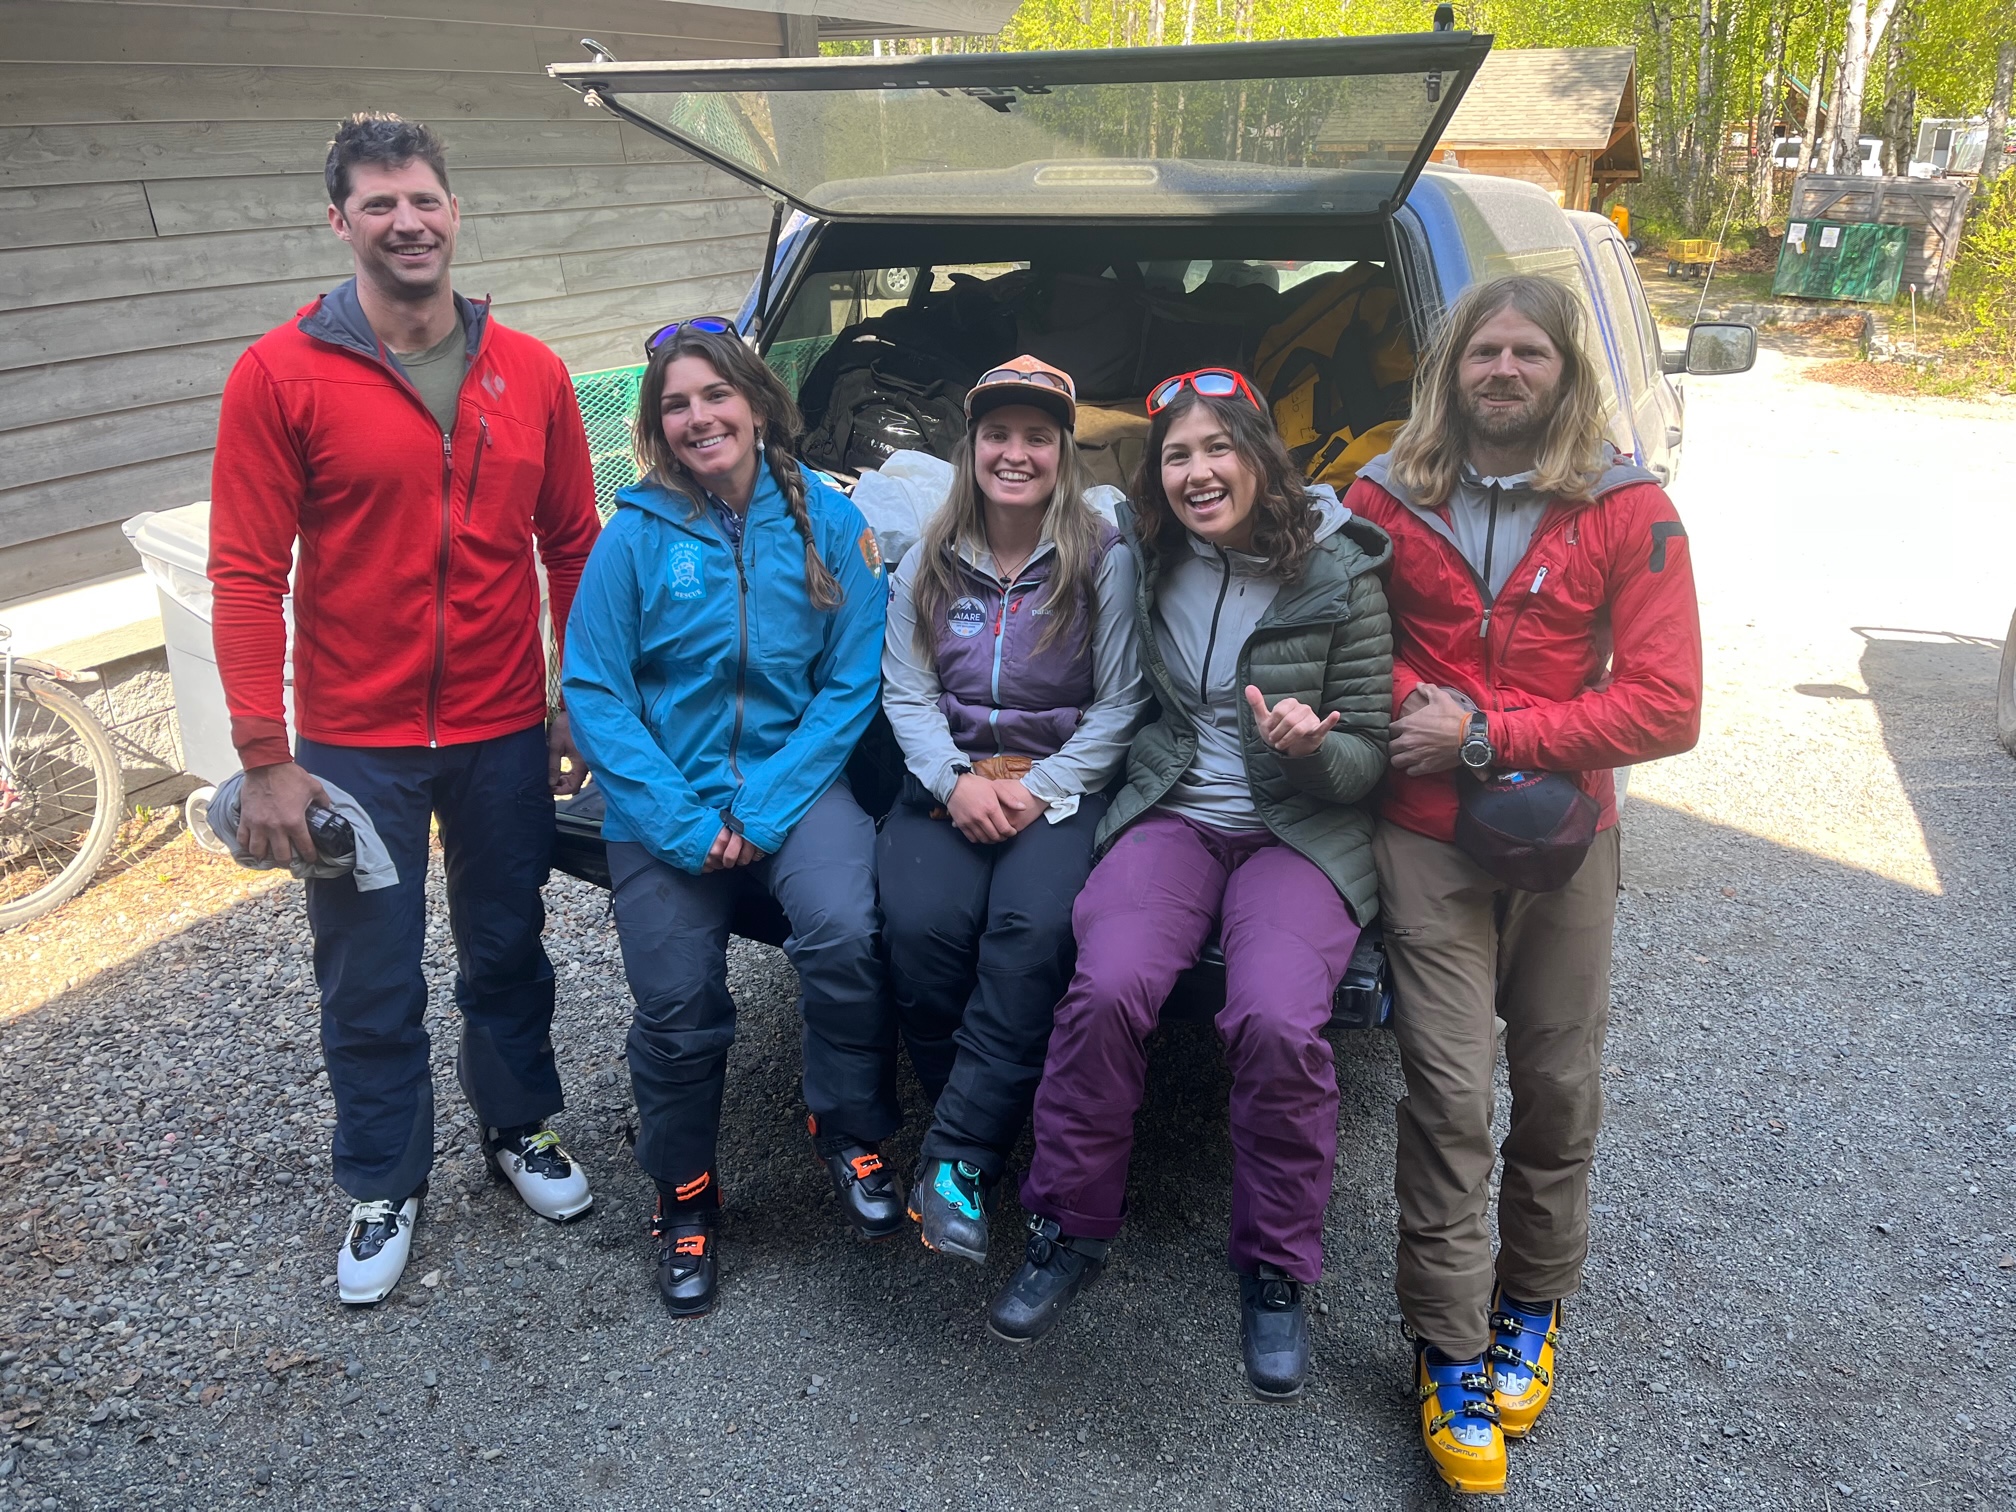 Five smiling climbers sit on the back of a pickup truck filled with duffel bags